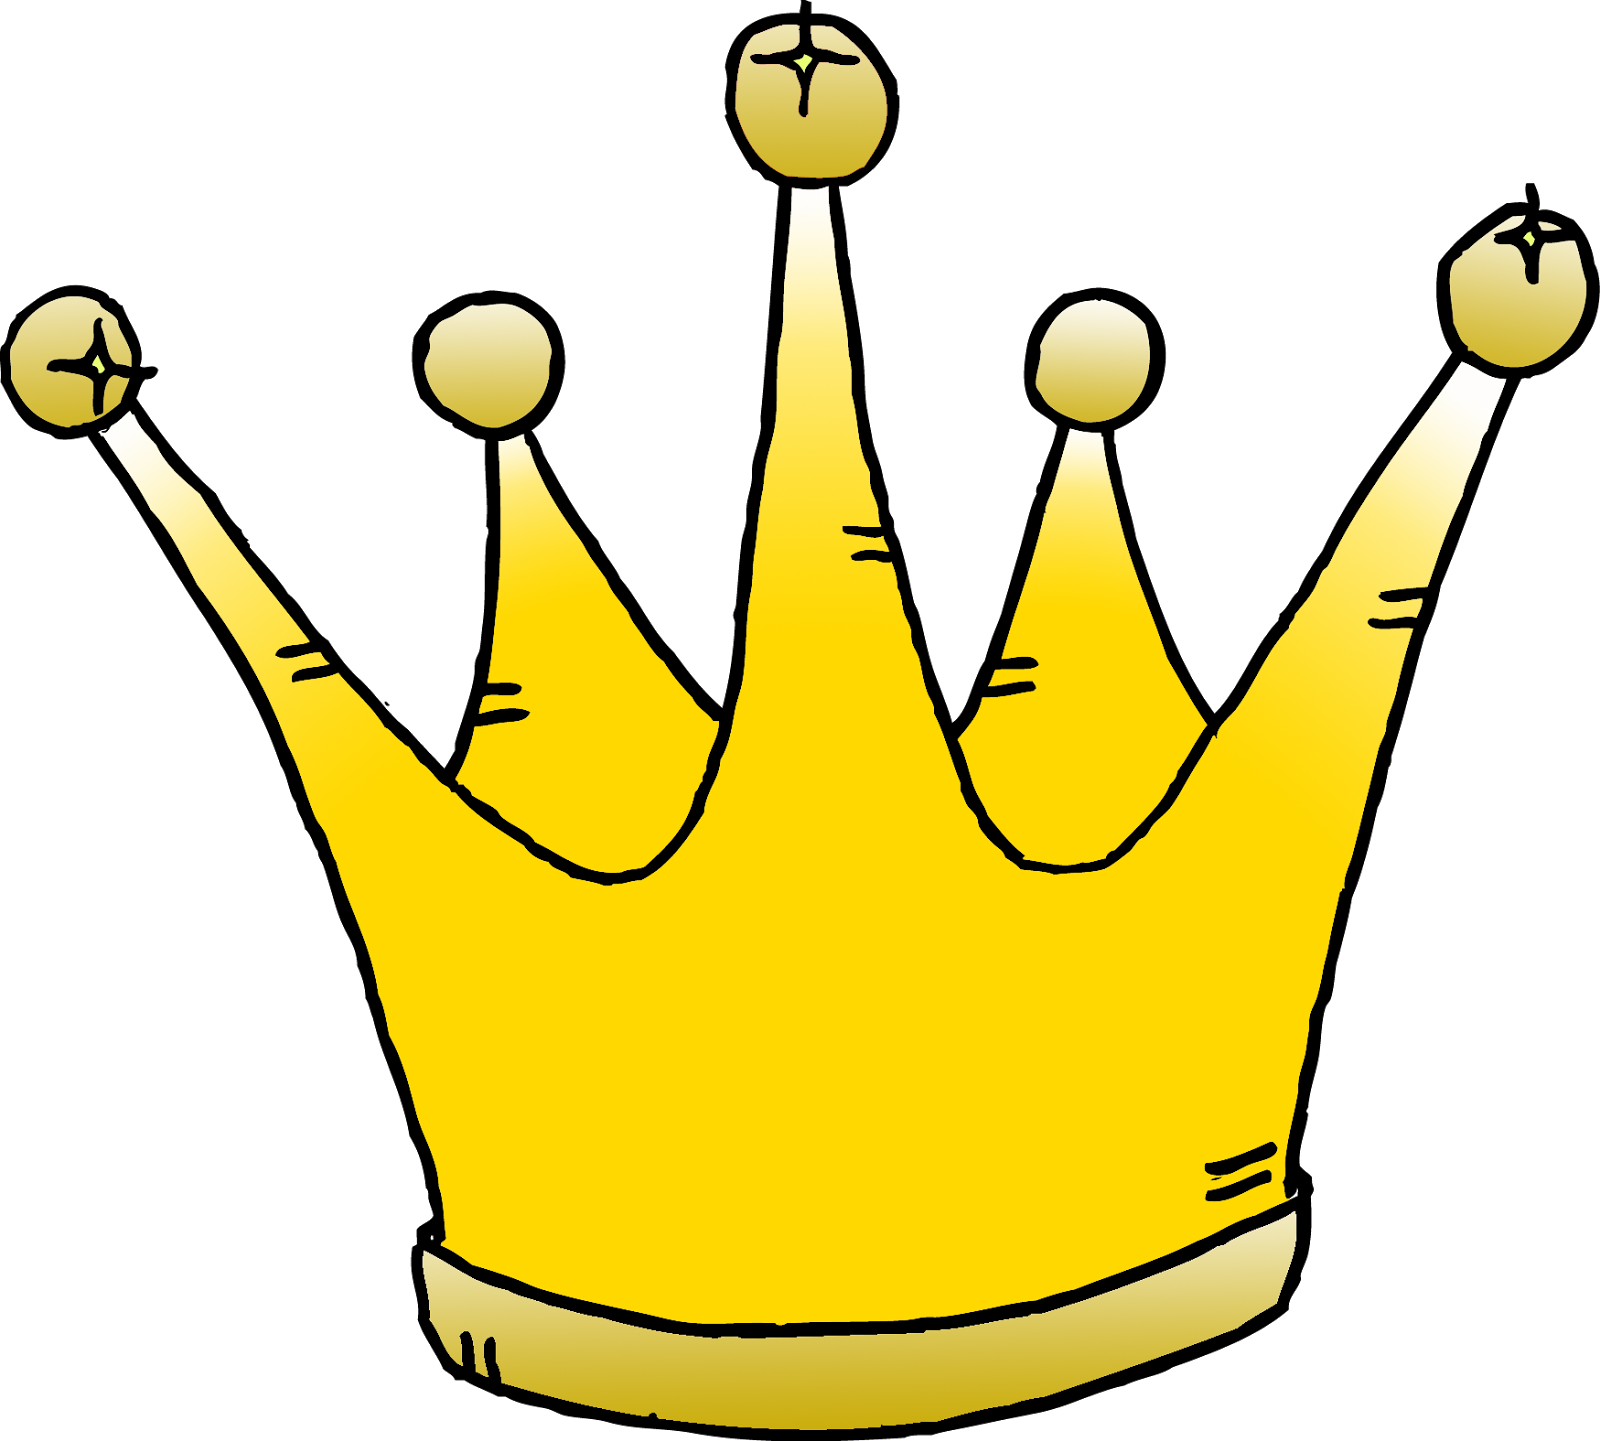 Clipart of crown